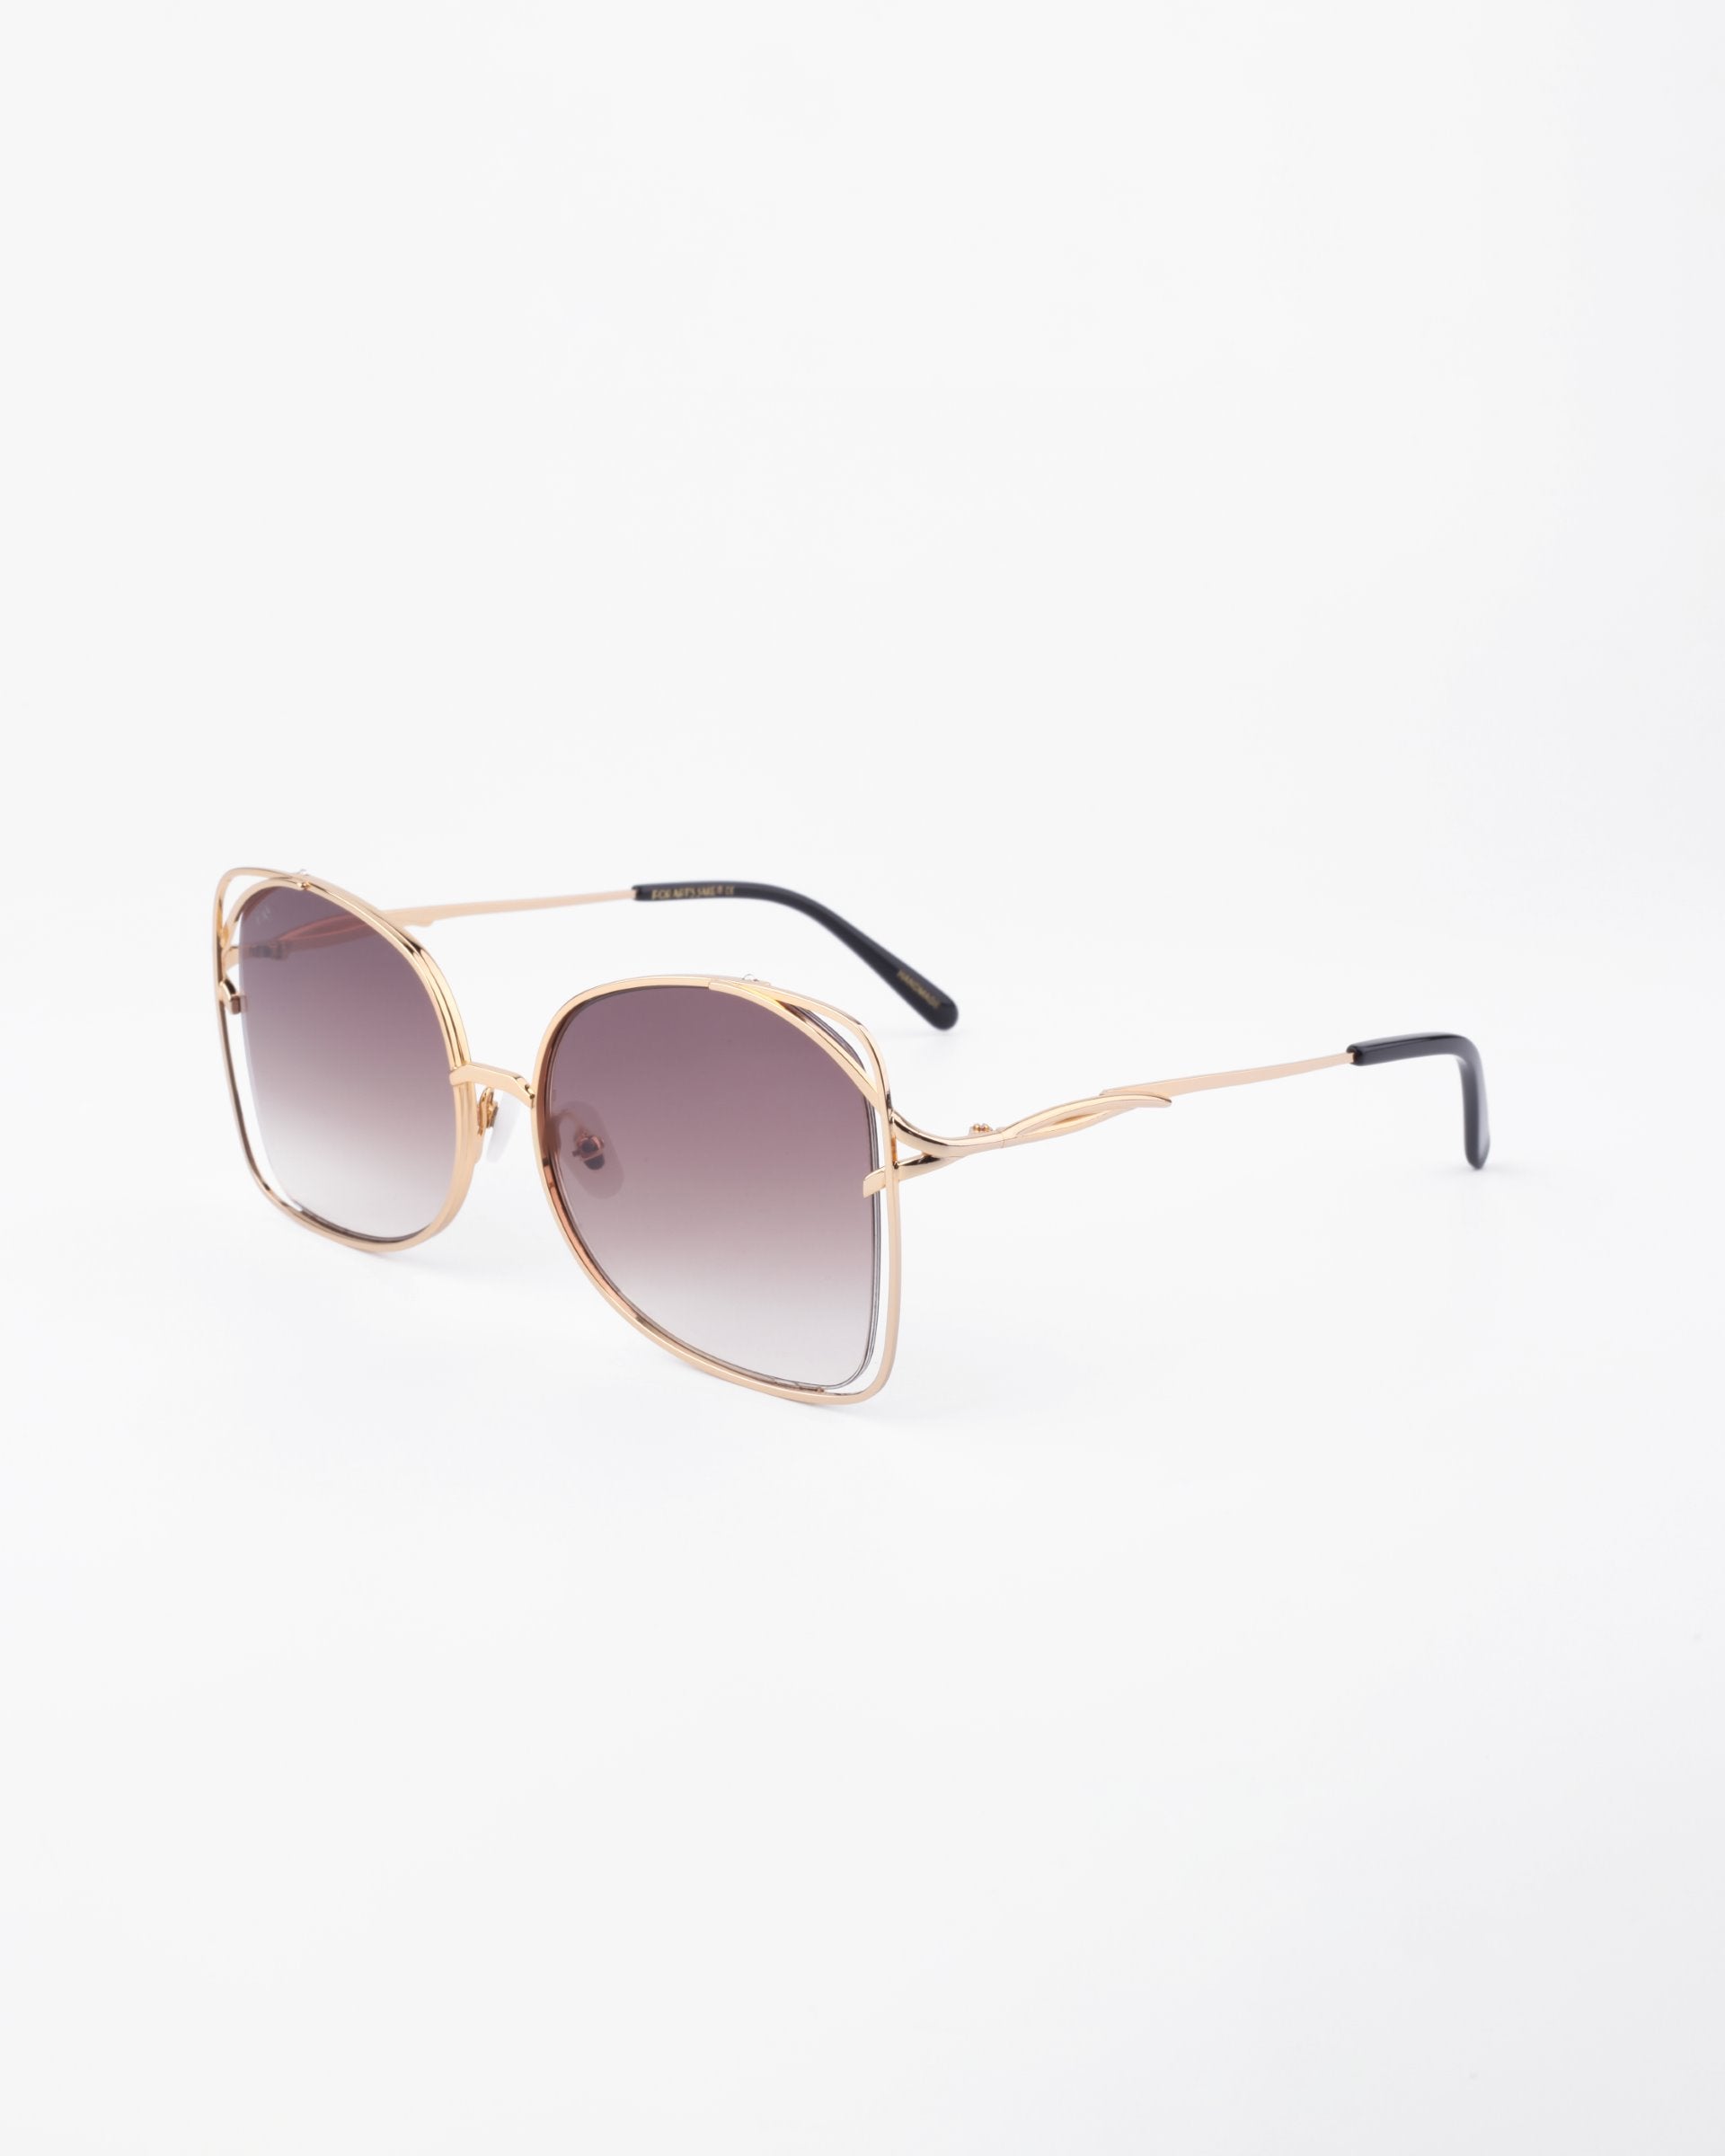 A pair of stylish, handmade sunglasses with large, square-shaped lenses shaded from dark to light. The Carousel sunglasses by For Art's Sake® feature a thin, gold-plated stainless steel frame with black temple tips. They offer complete UVA & UVB protection. The background is plain white.